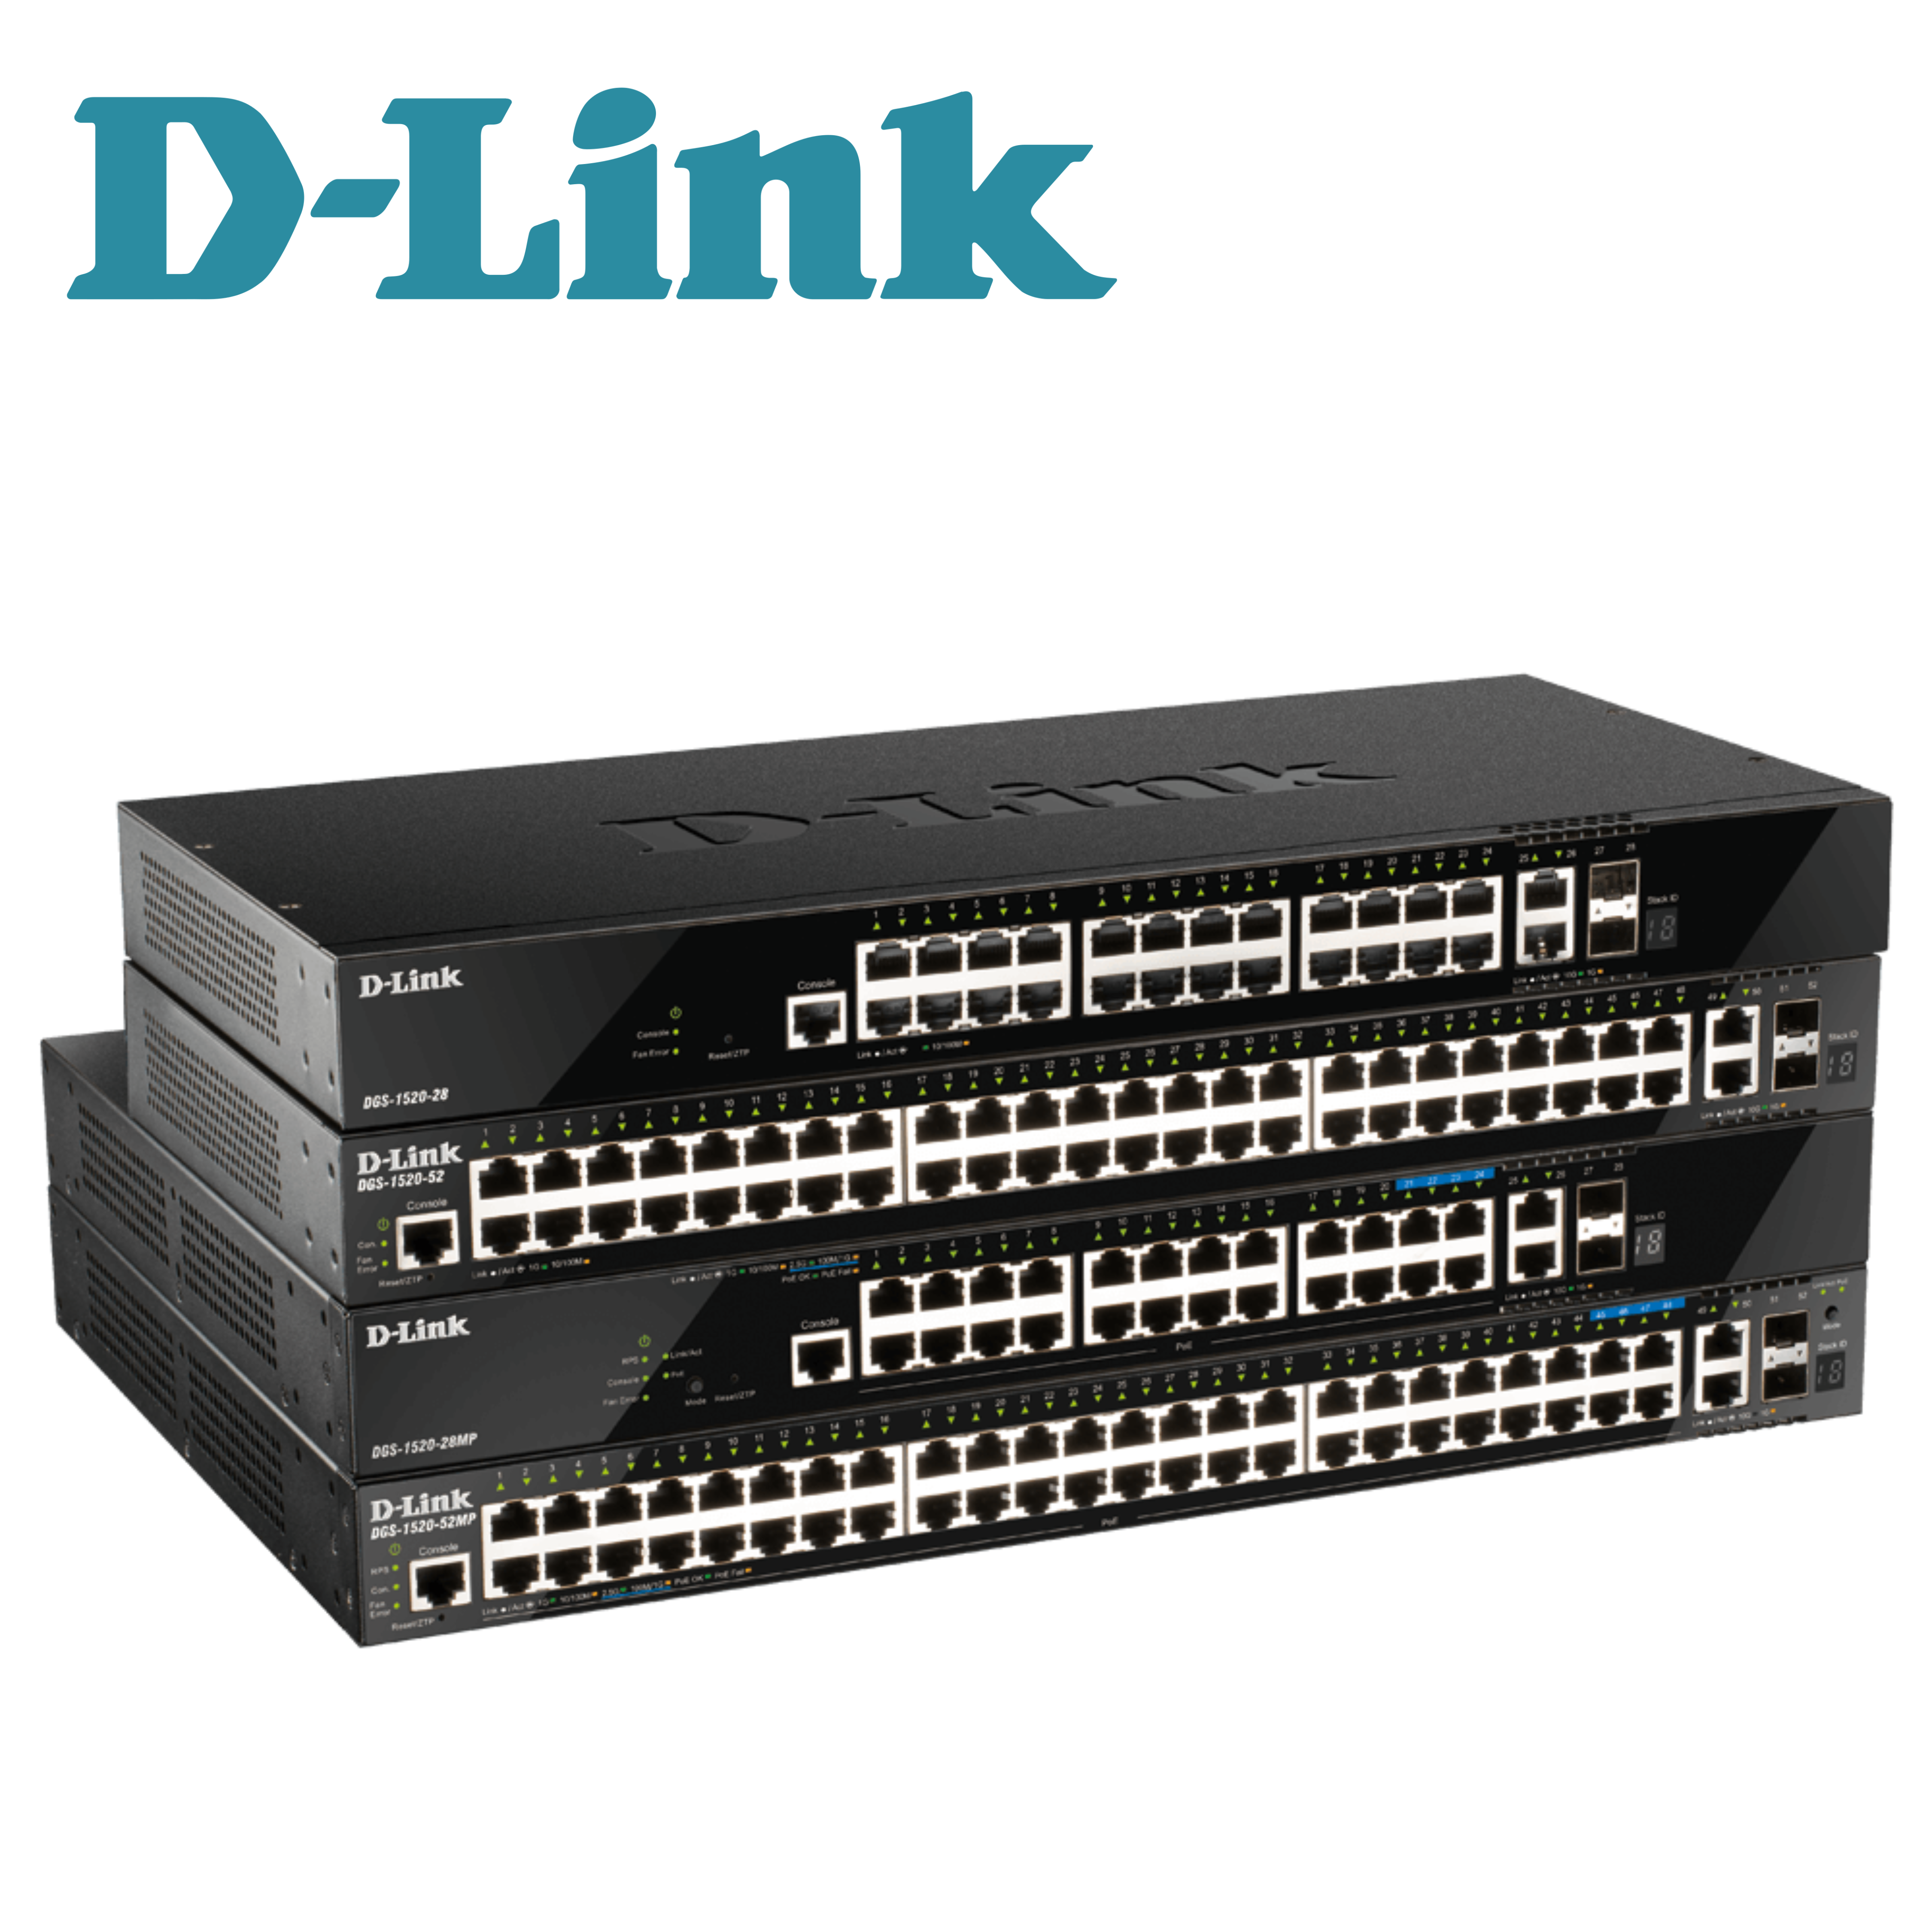 D-Link DGS-1520 Series (Layer 3 Stackable Smart Managed Switch)